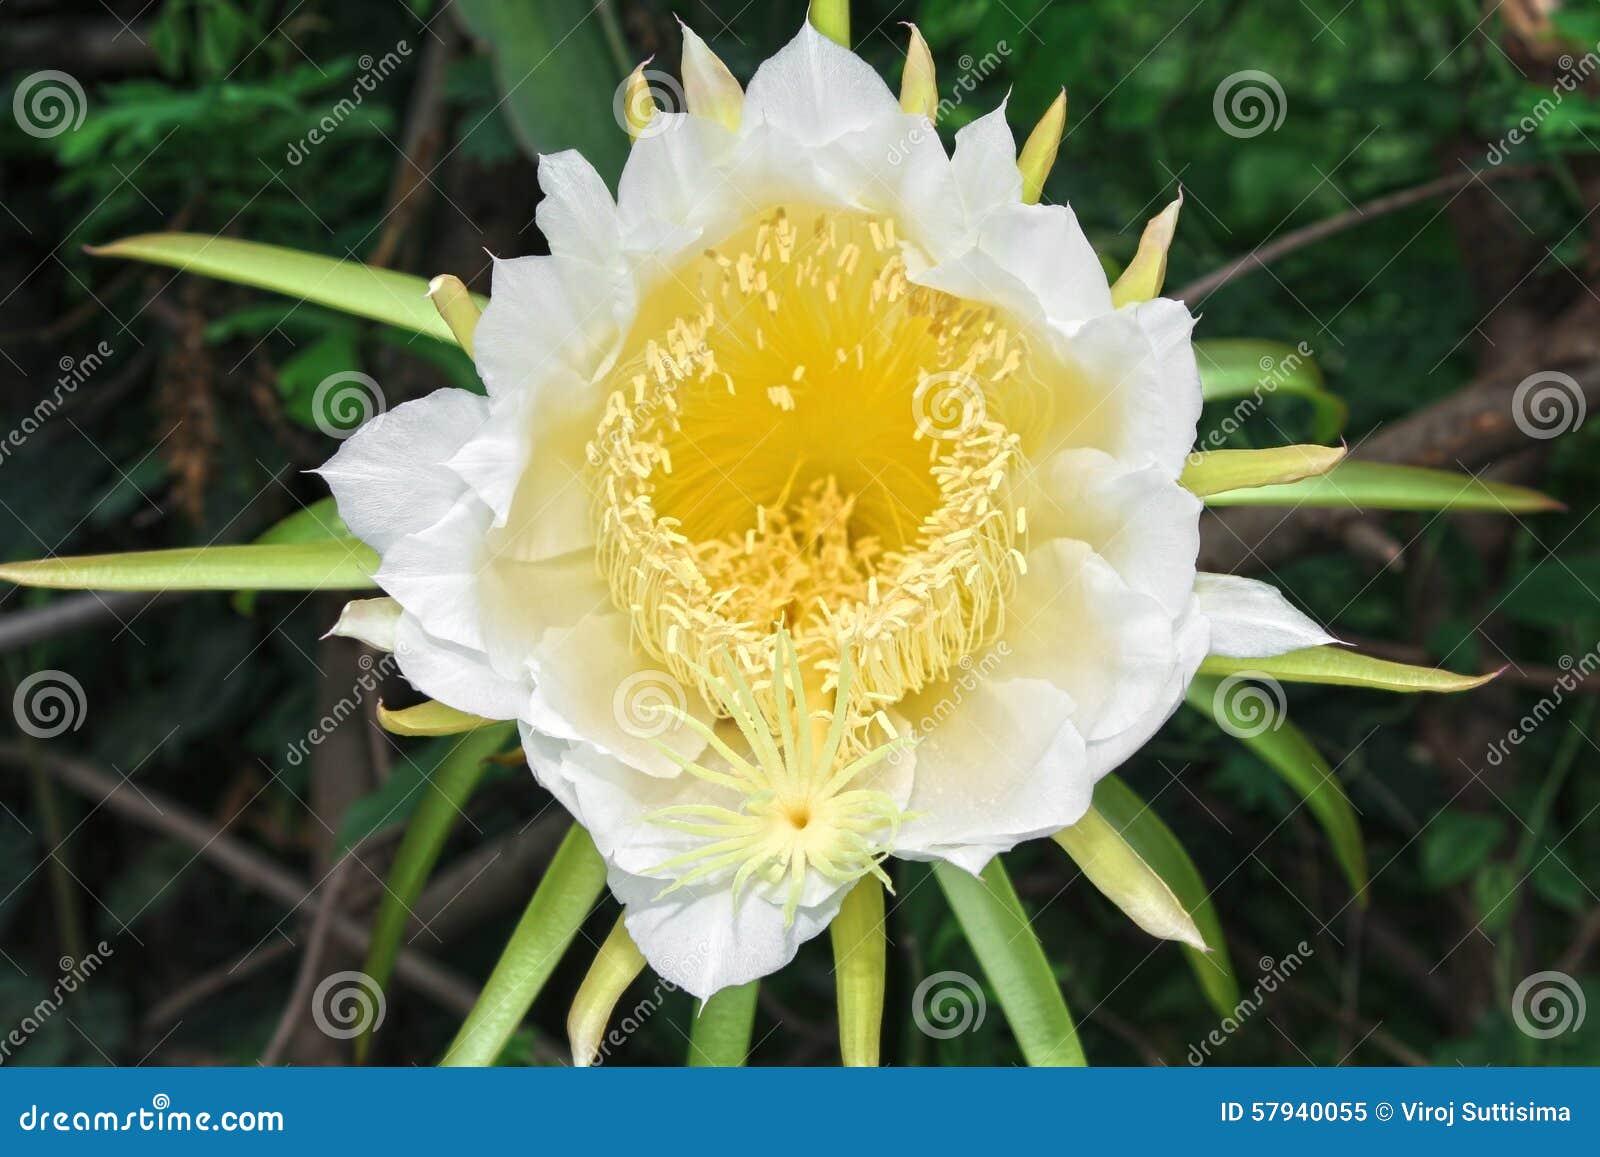 Dragon Fruit Flower on Blooming (hylocereus Cactaceae) Stock Image - Image  of healthy, botany: 57940055